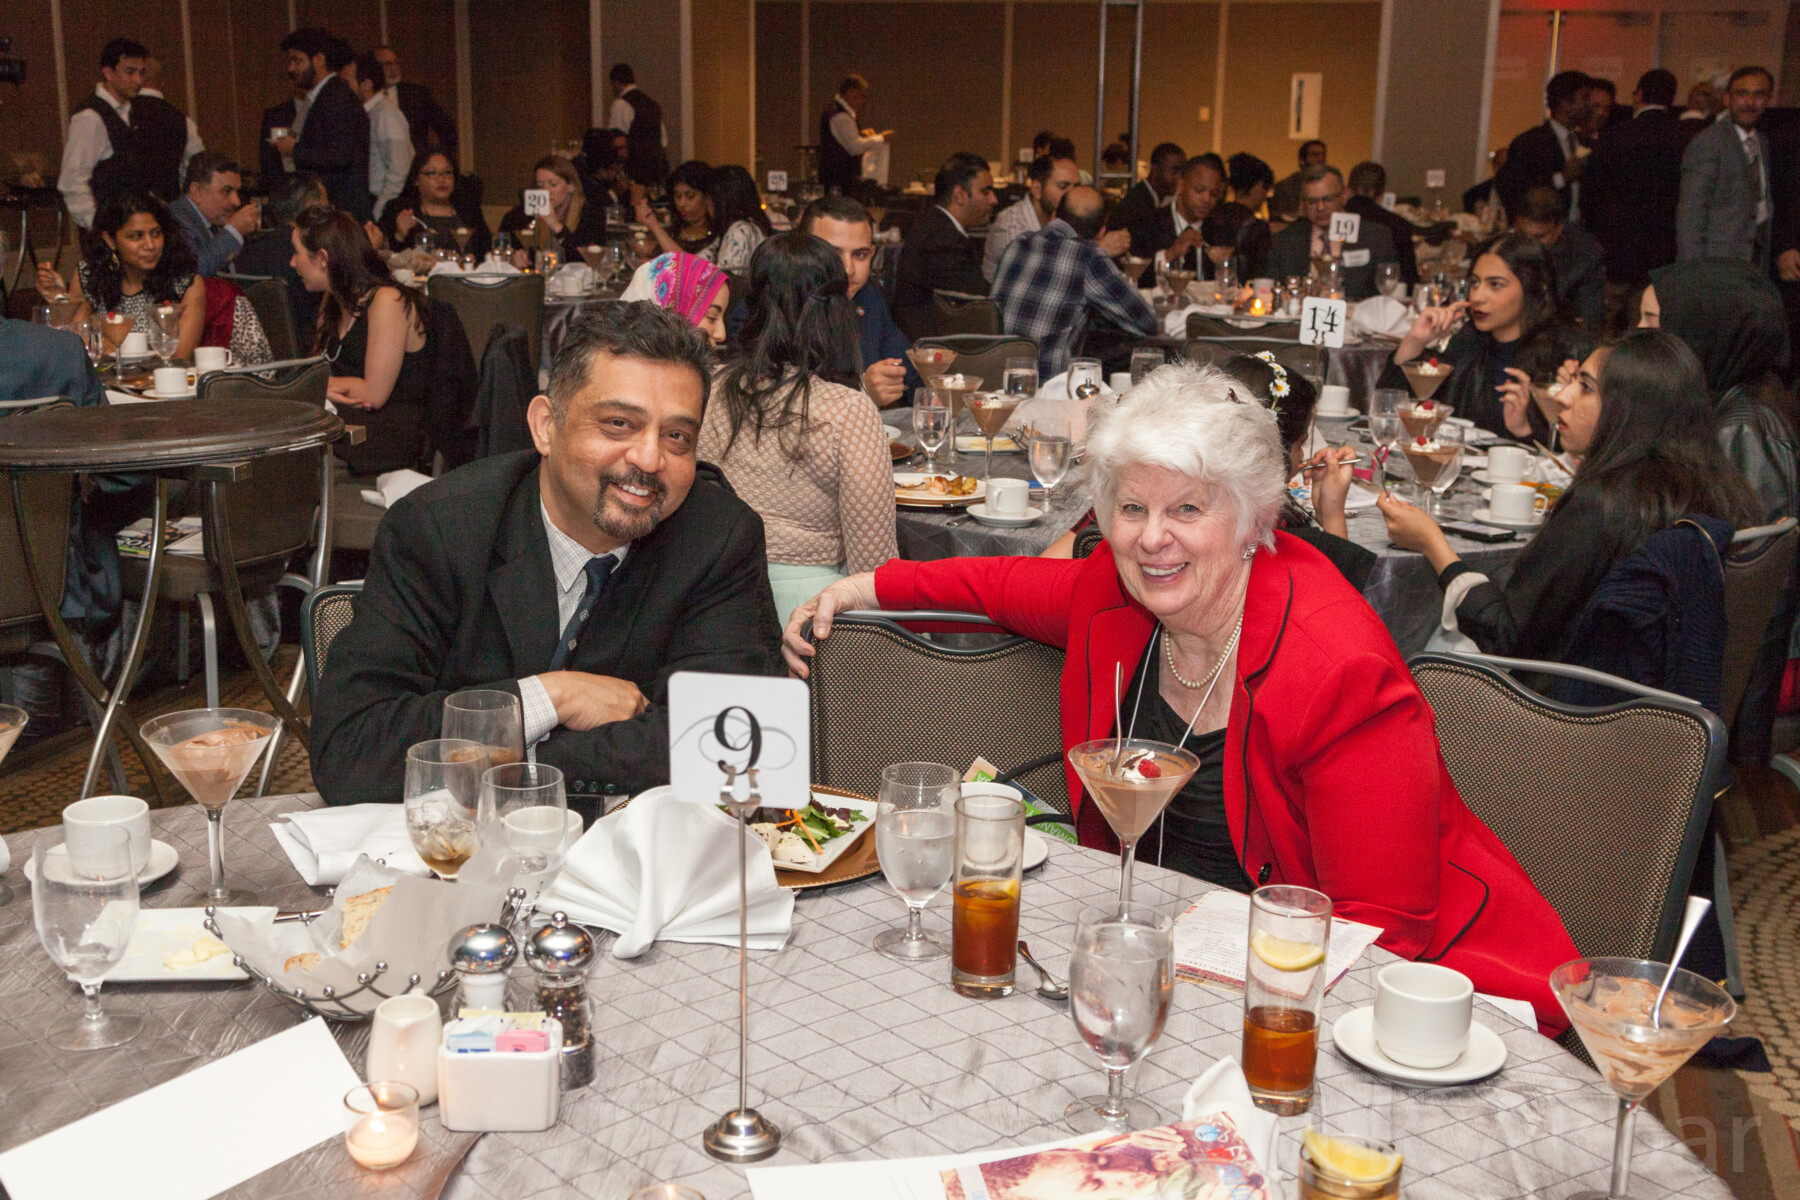 A man and a woman smile from their banquet table in a hall of tables.